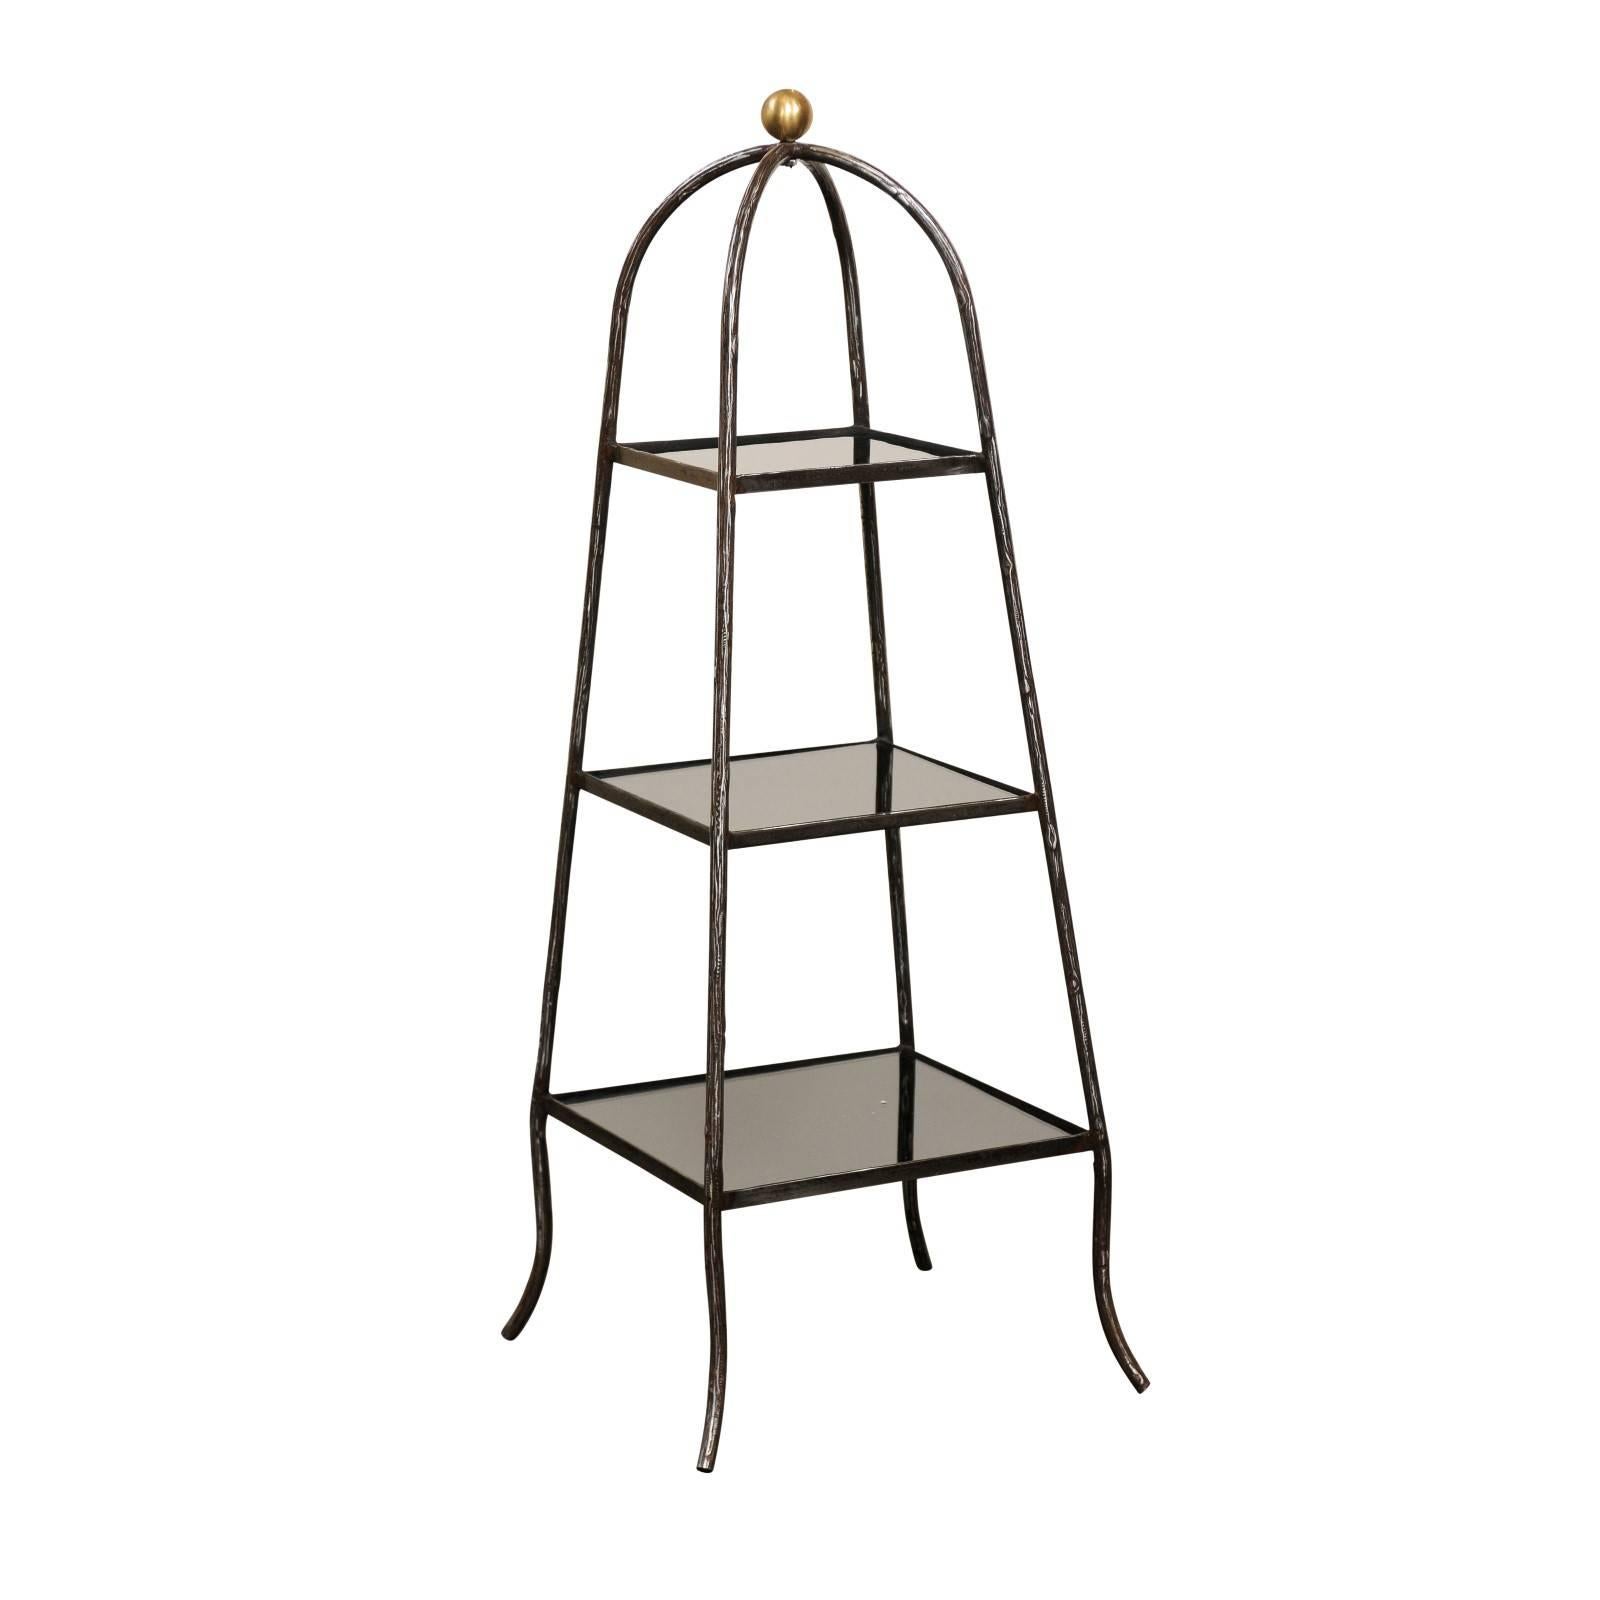 Italian Mid-Century Steel Tiered Stand with Black Glass Shelves and Domed Top For Sale